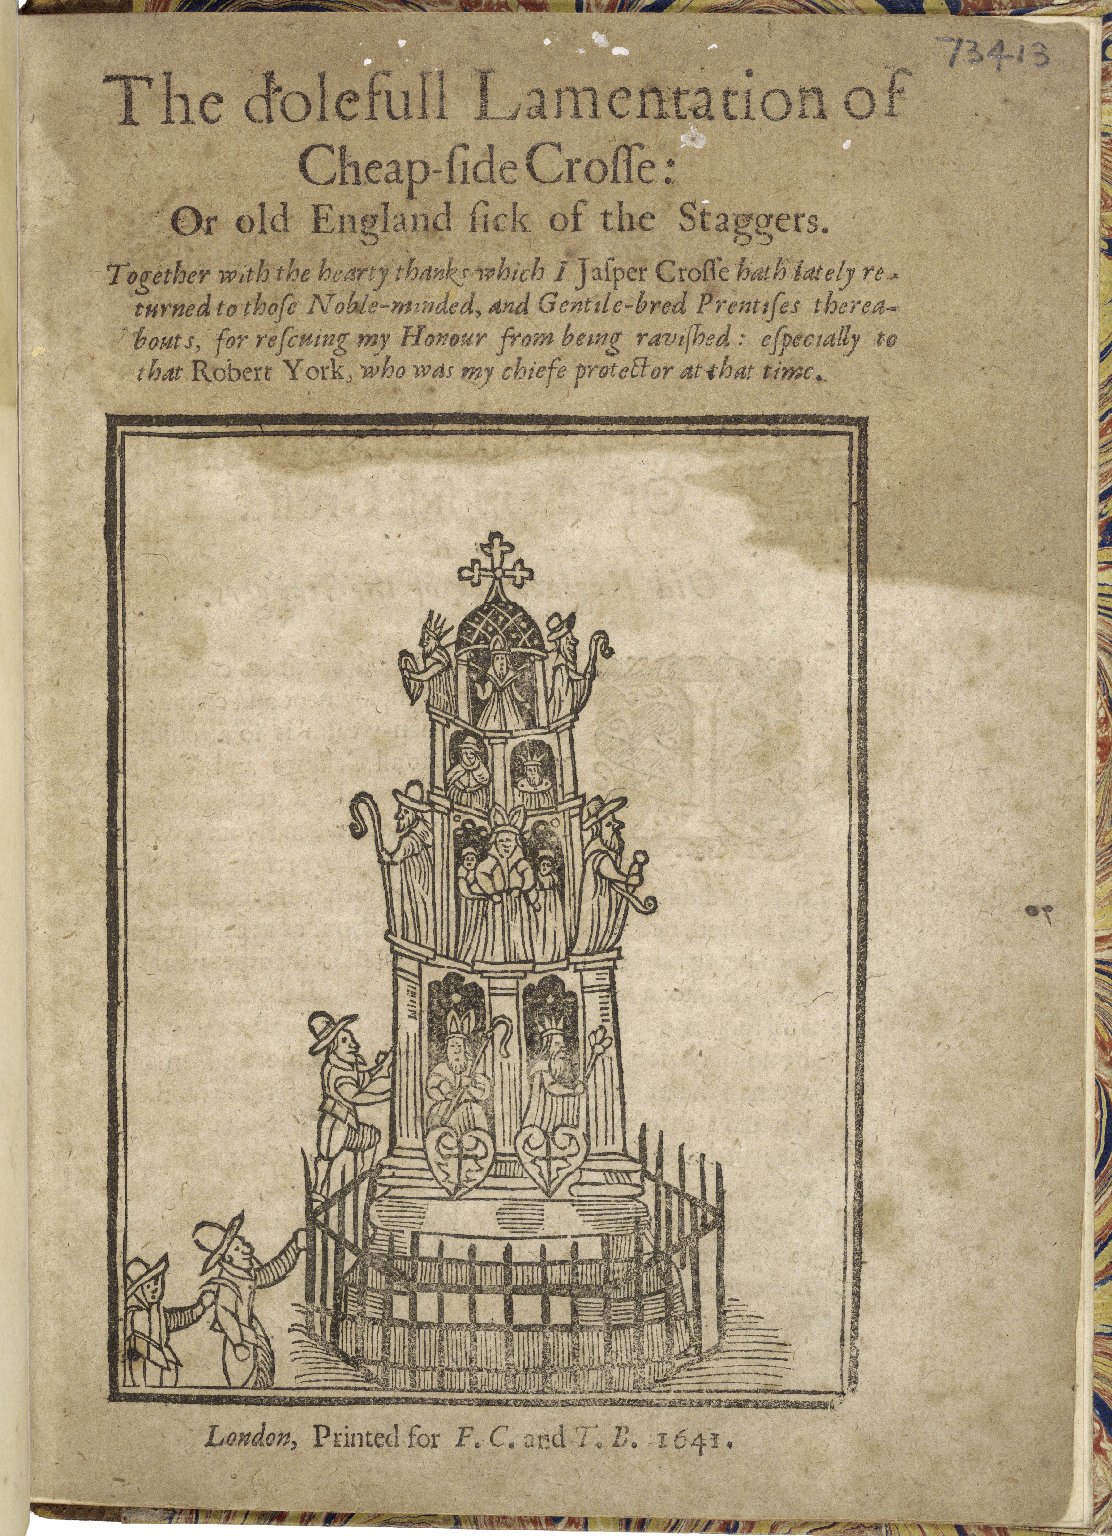 Title page of The Doleful Lamentation of Cheapside Cross. Image courtesy of the Folger Digital Image Collection.